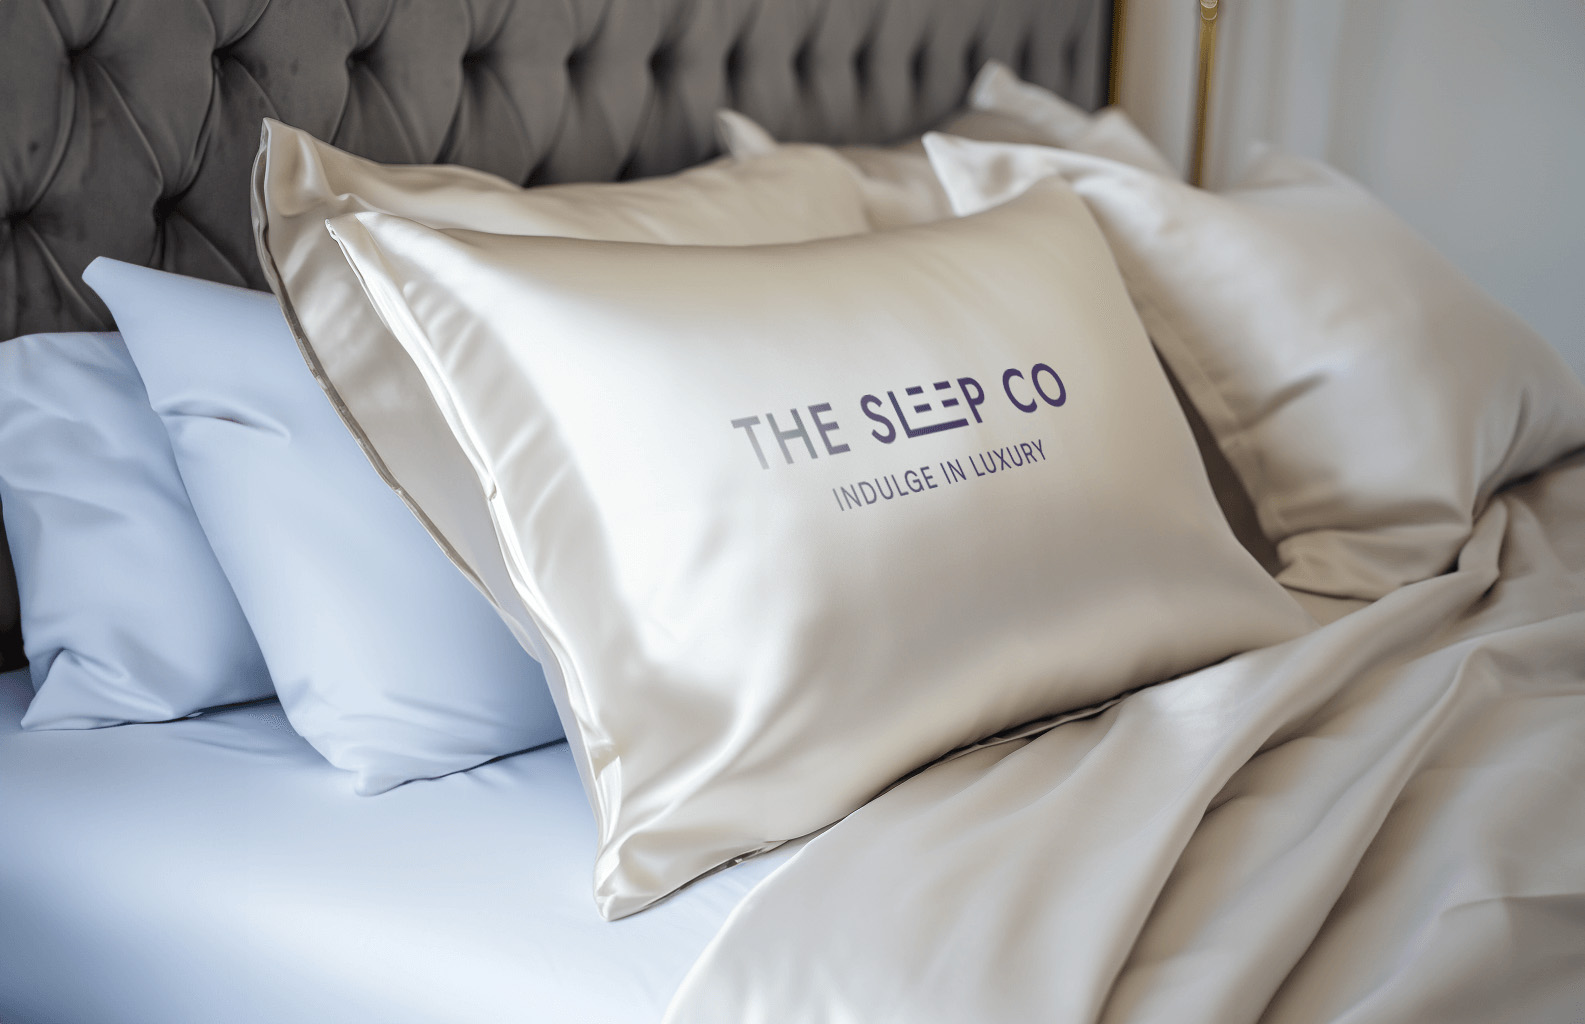 The relationship between luxury bedding and a good night’s sleep